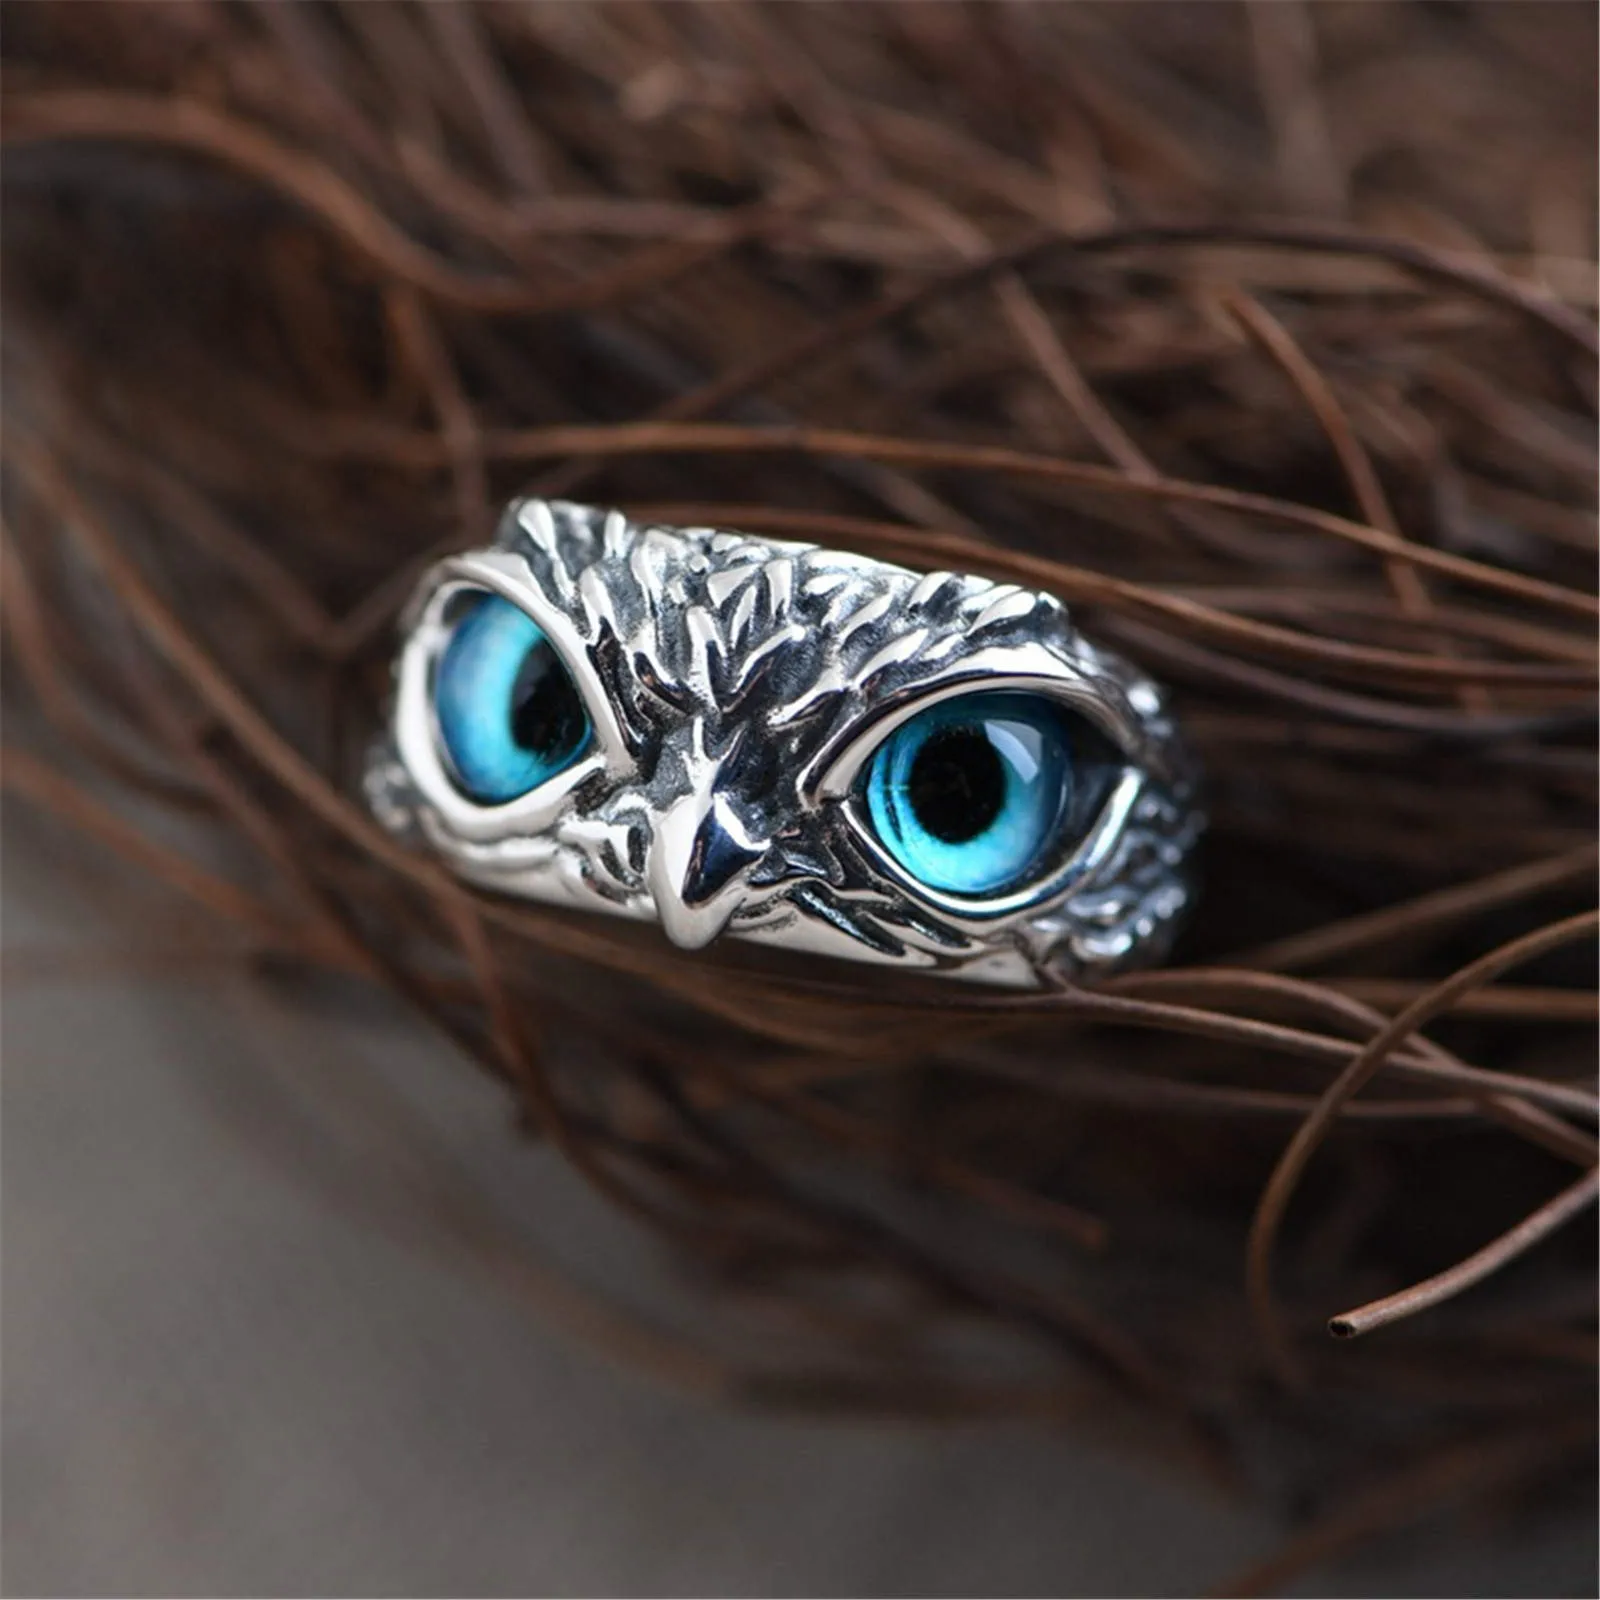 

2021 Retro Eyed Owl Ring Adjustable Ring for Mother's Day Gift Jelwery Accessories, Vintage sliver